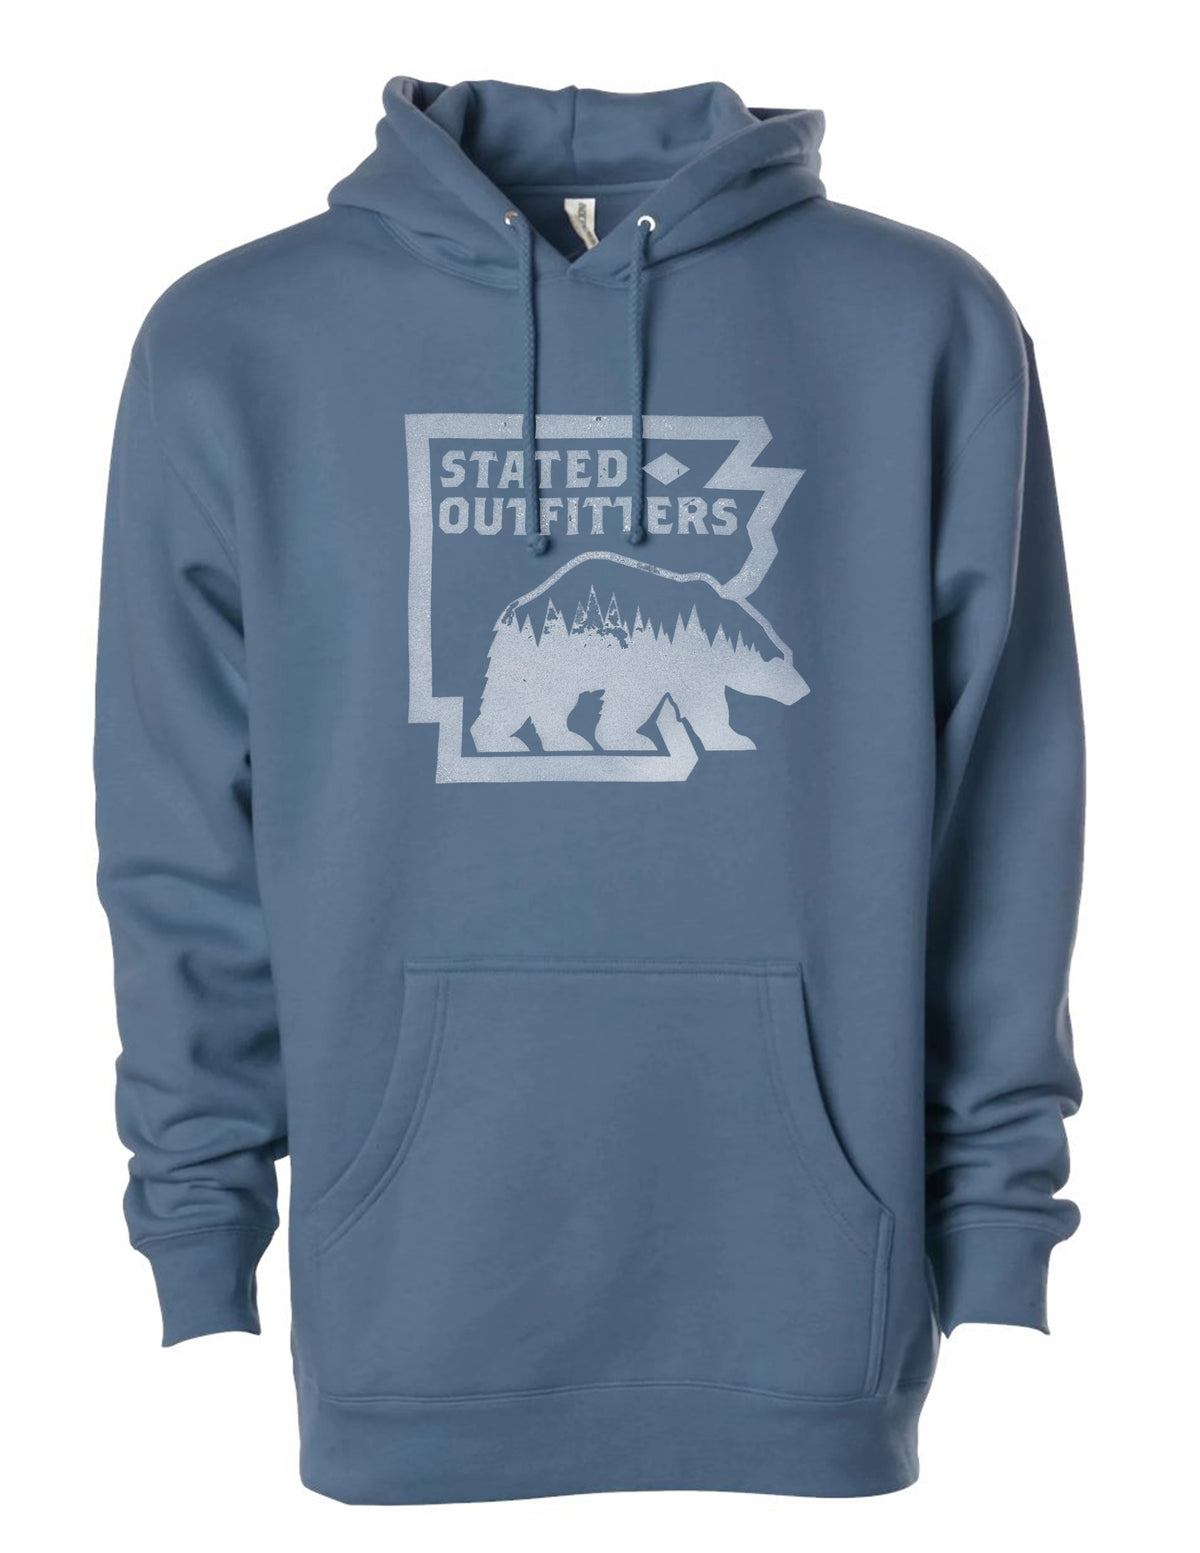 Stated Outfitters Bruin Hoodie